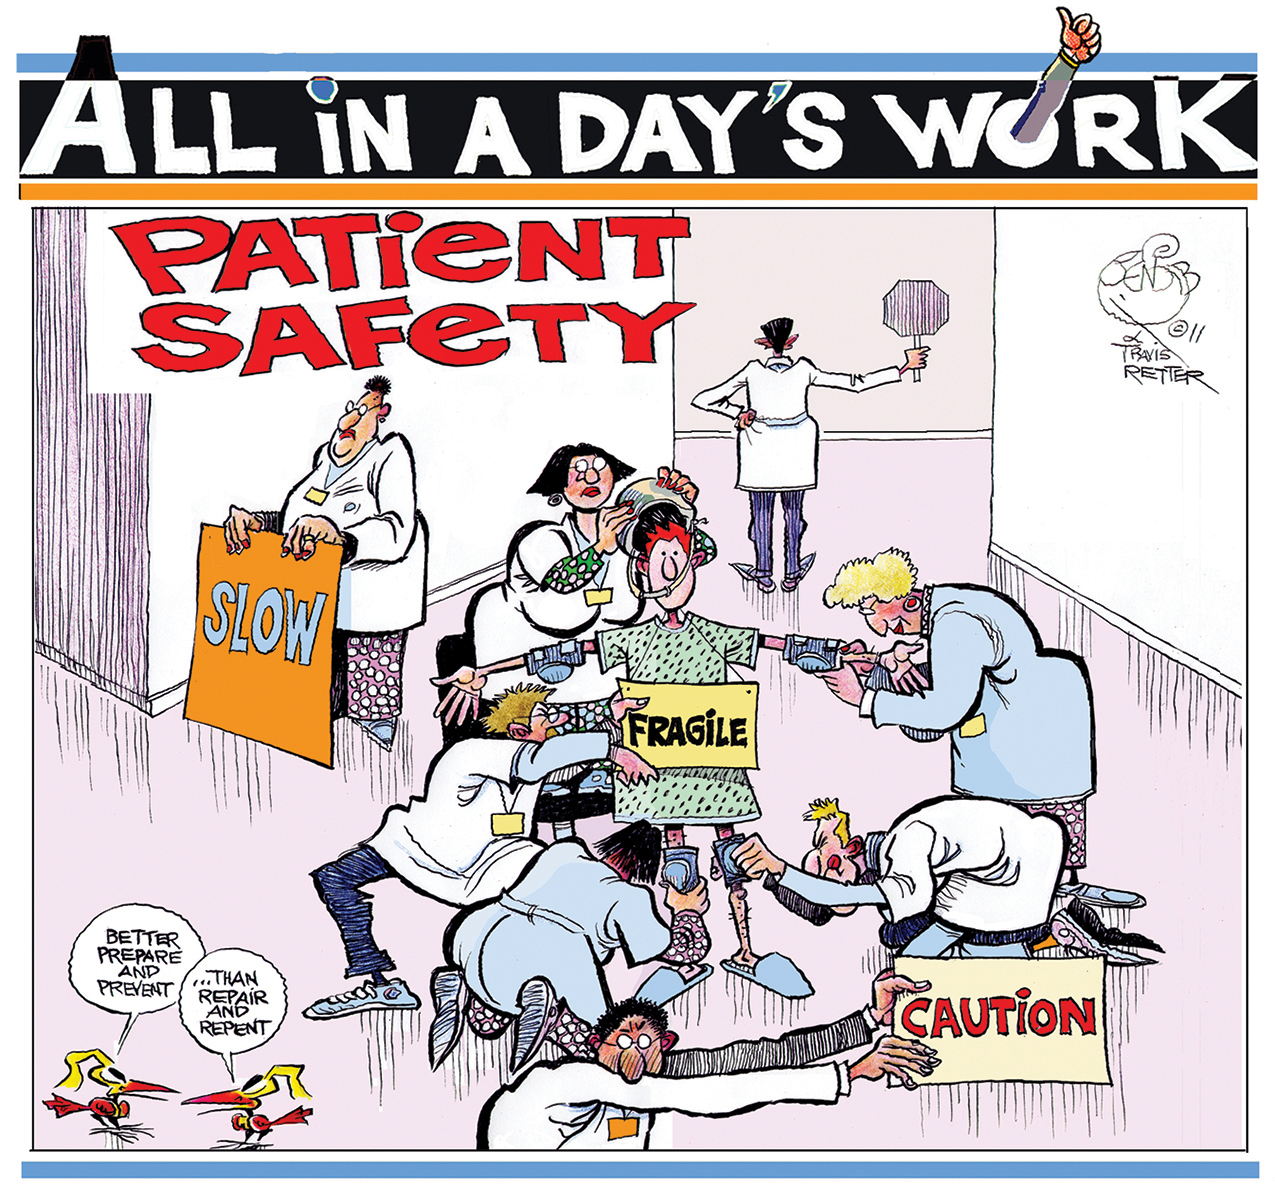 All in a Day's Work: Patient Safety | Labor Management Partnership